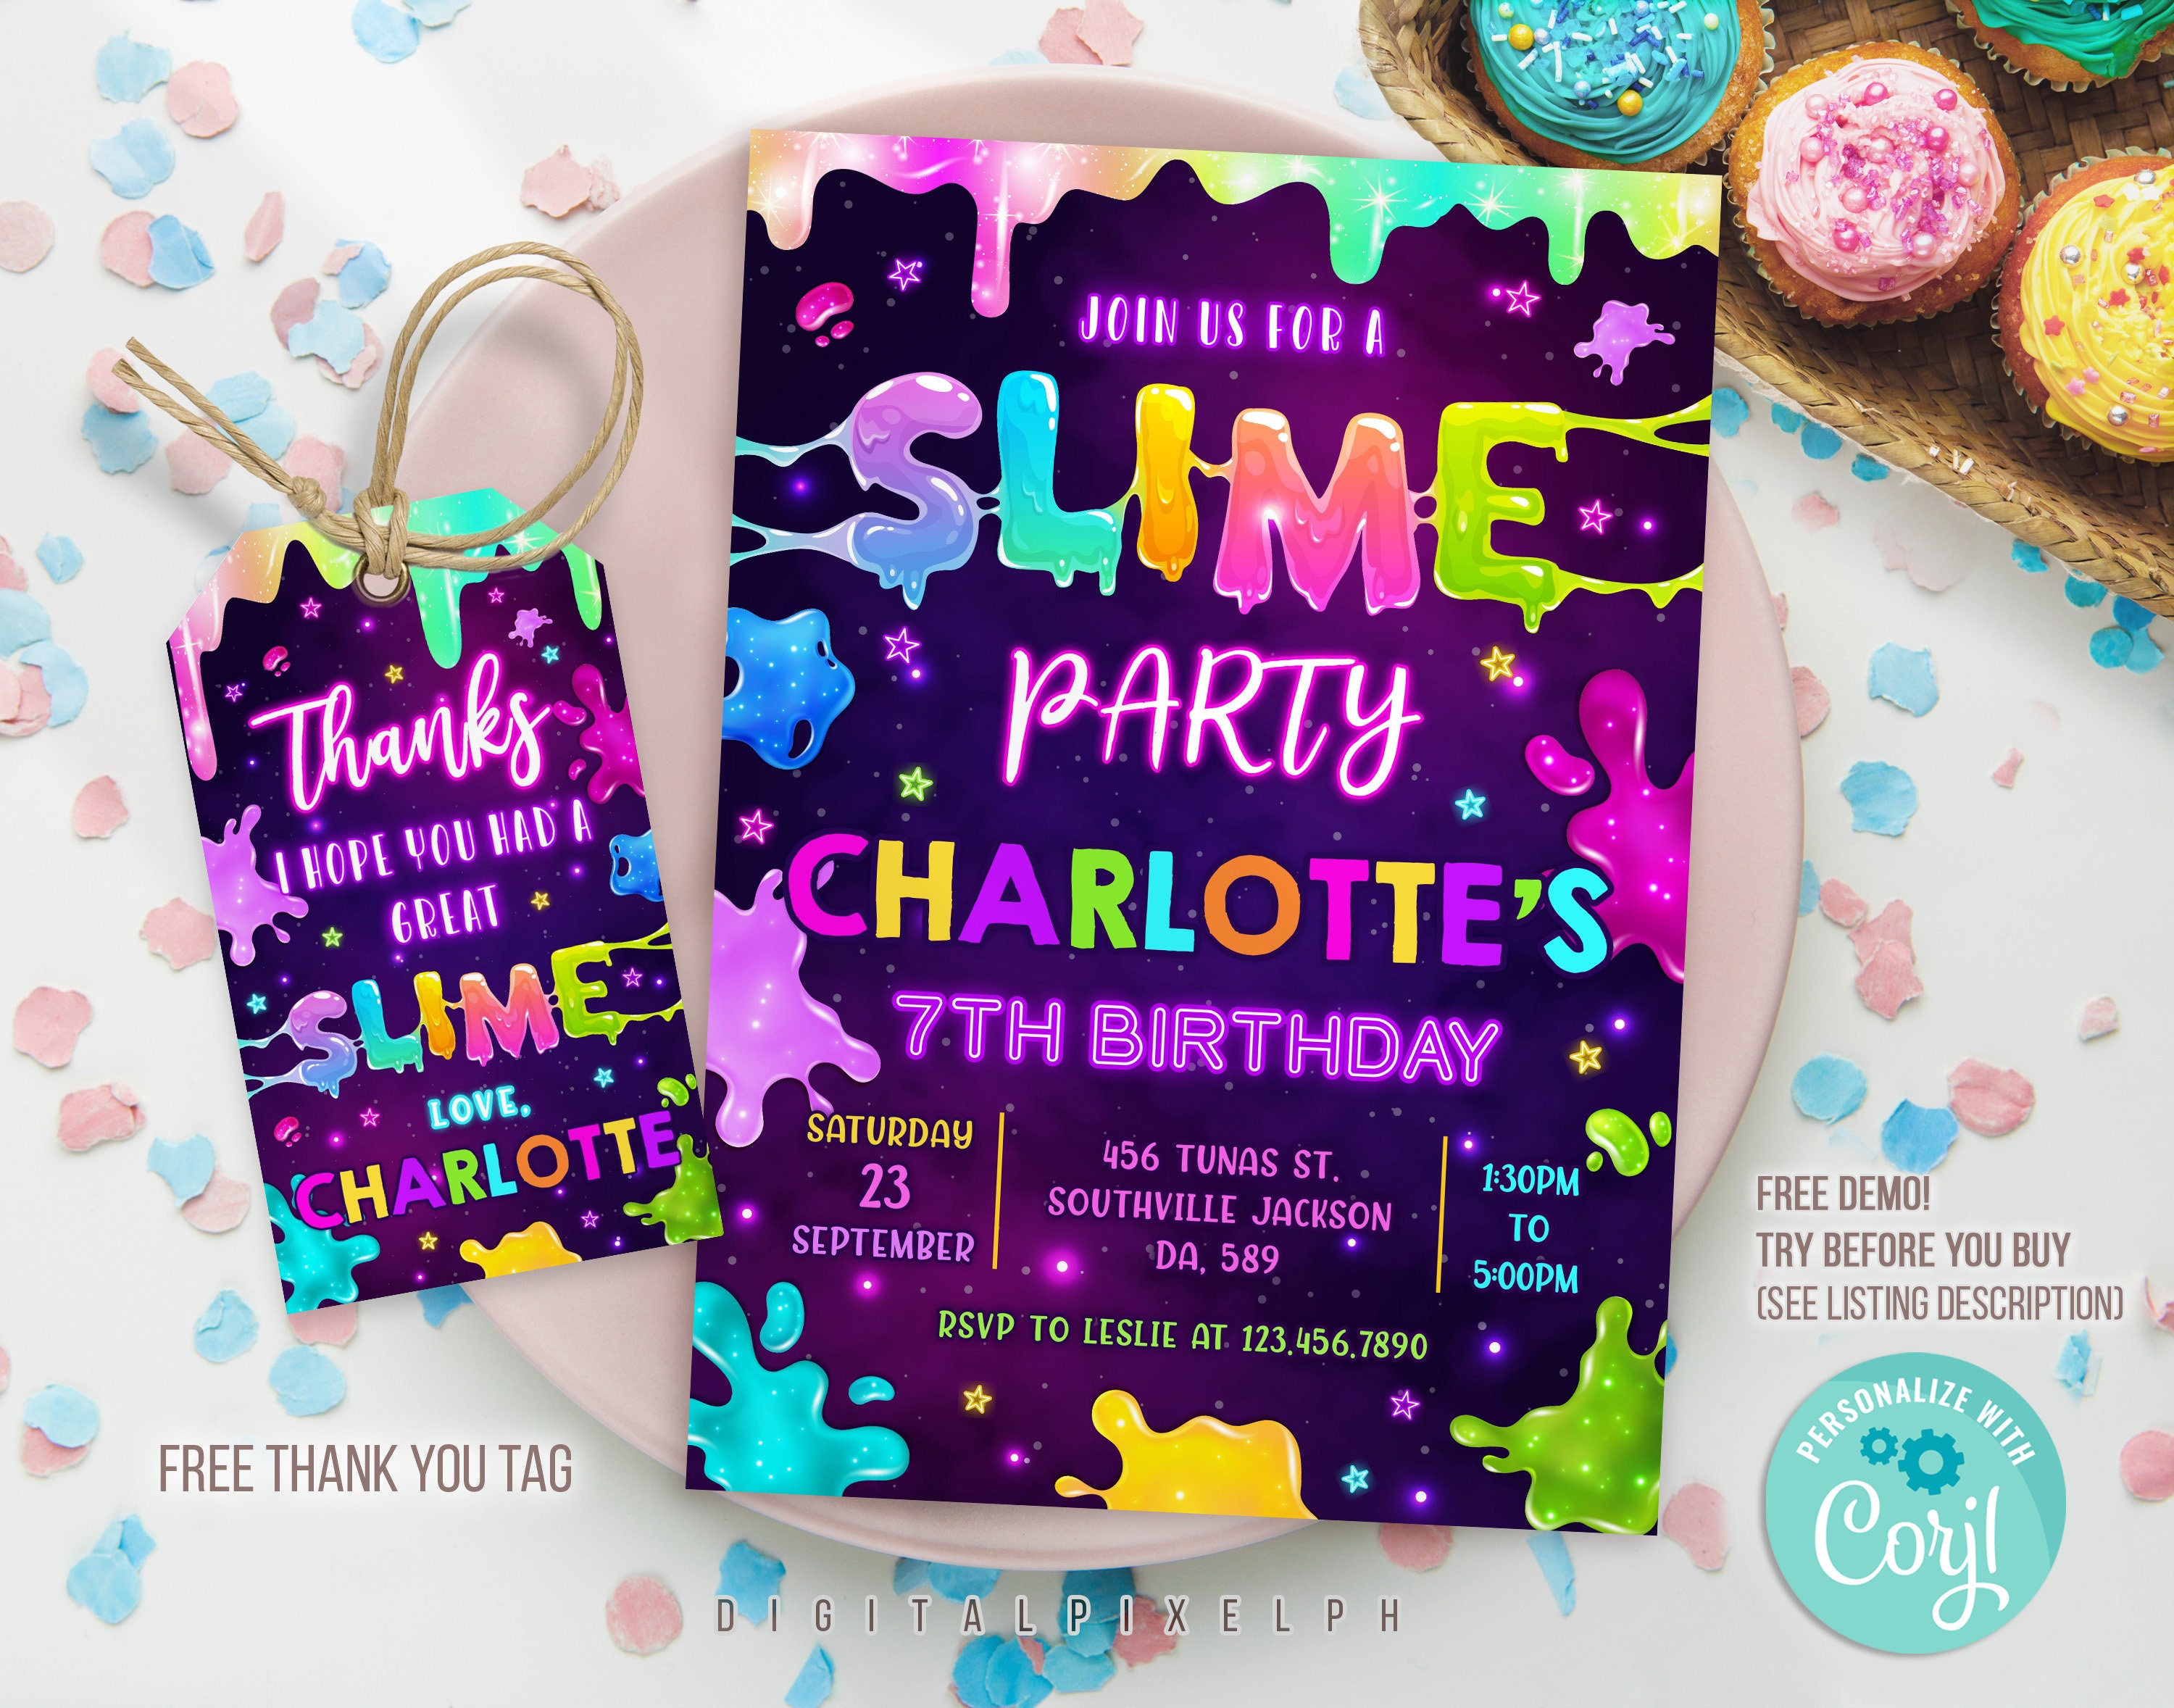 Knibeo Slime Party Invitations Girl - 4x6 Inches Slime Birthday Party  Invitations Cards Set of 20 with White Envelopes, Slime Party Decorations